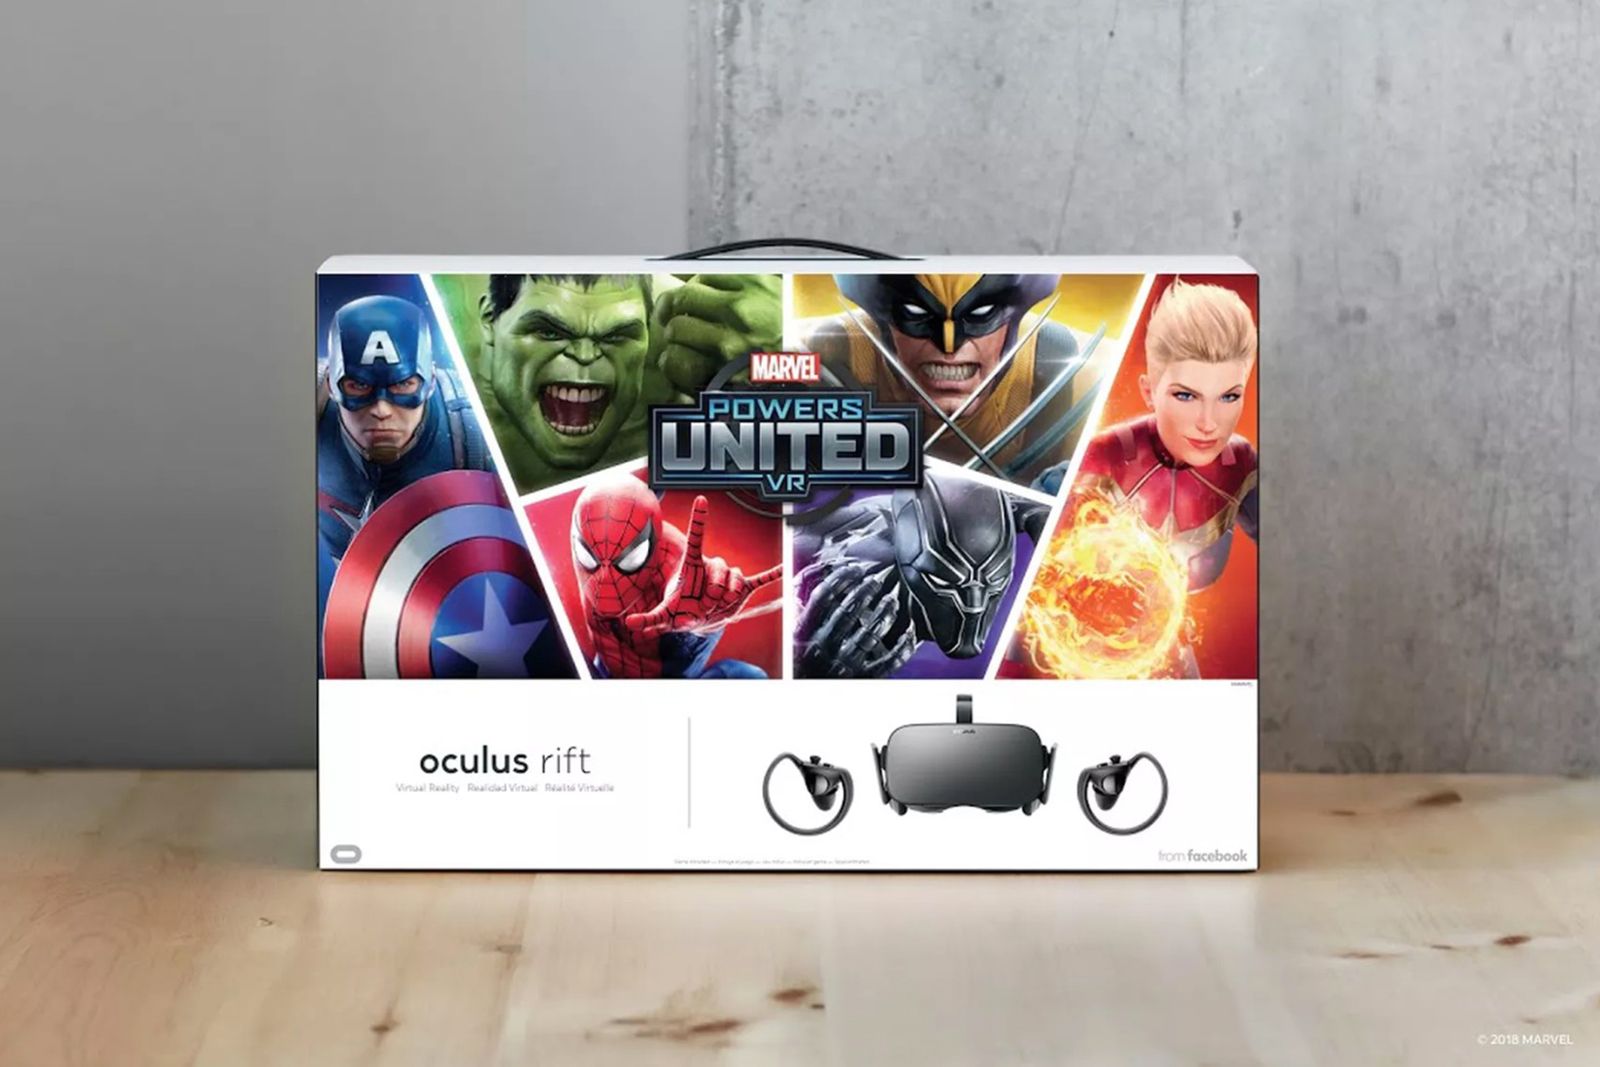 Oculus launches Rift bundle with Marvel Powers United VR next week image 1